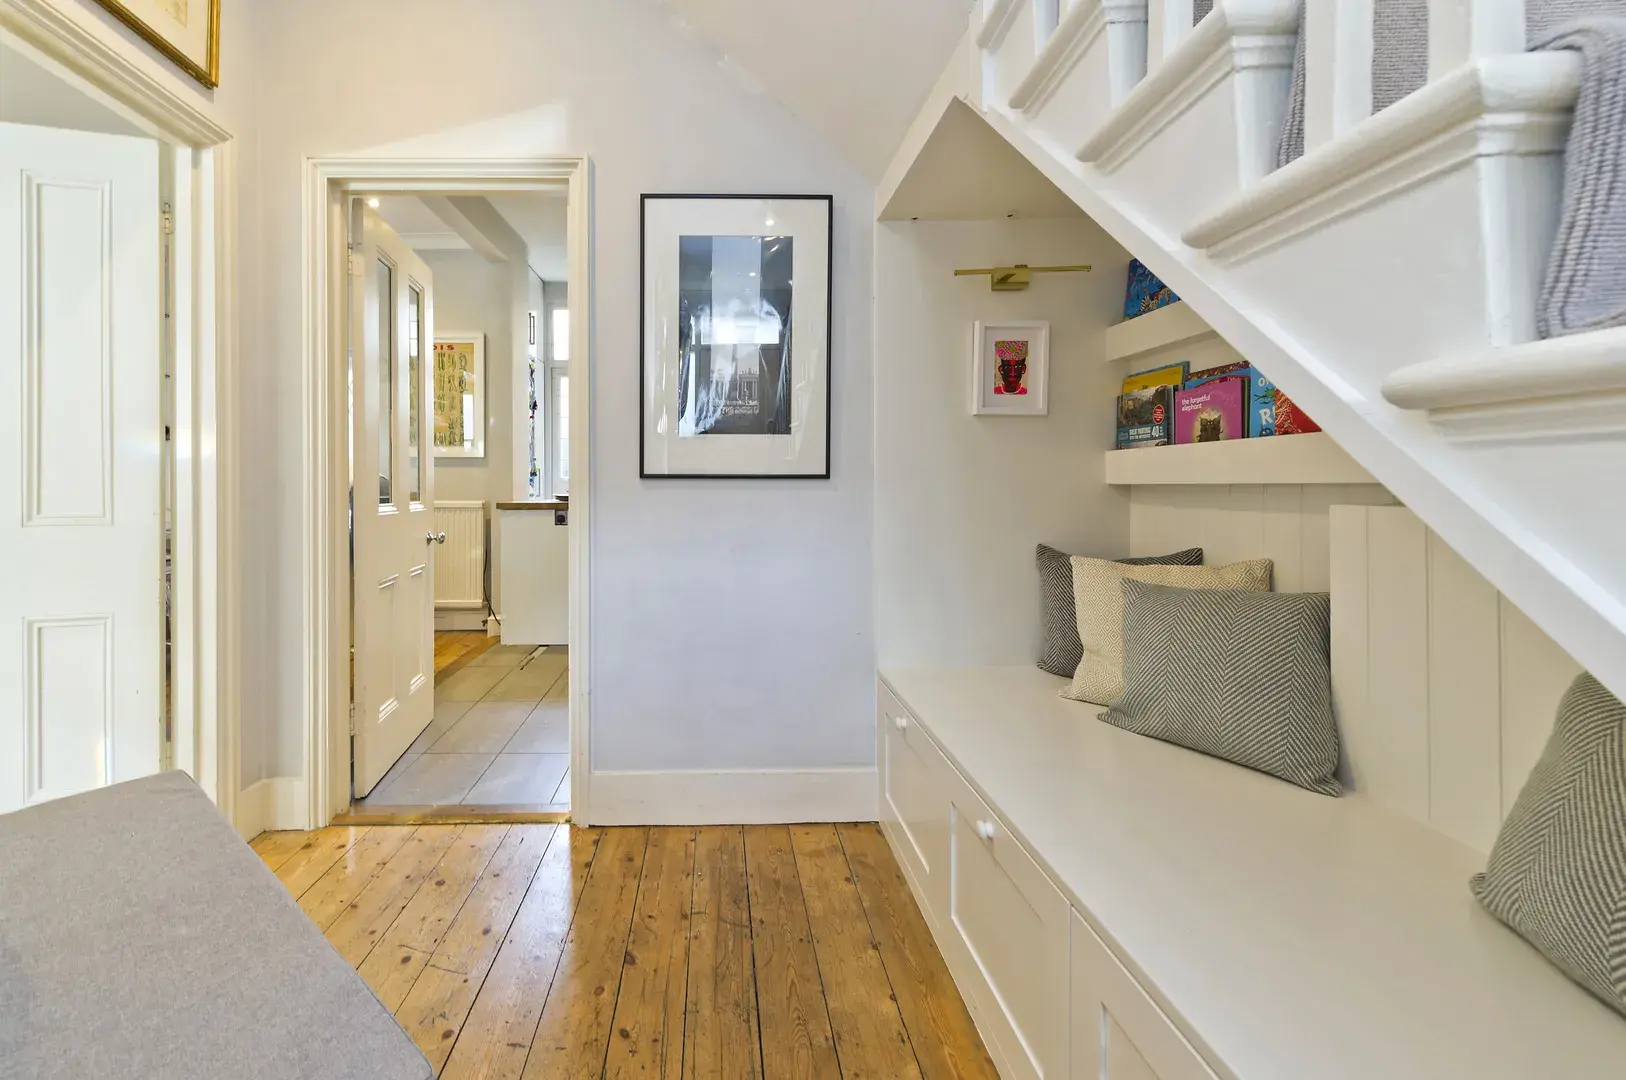 Tunis Road, holiday home in Hampstead, London